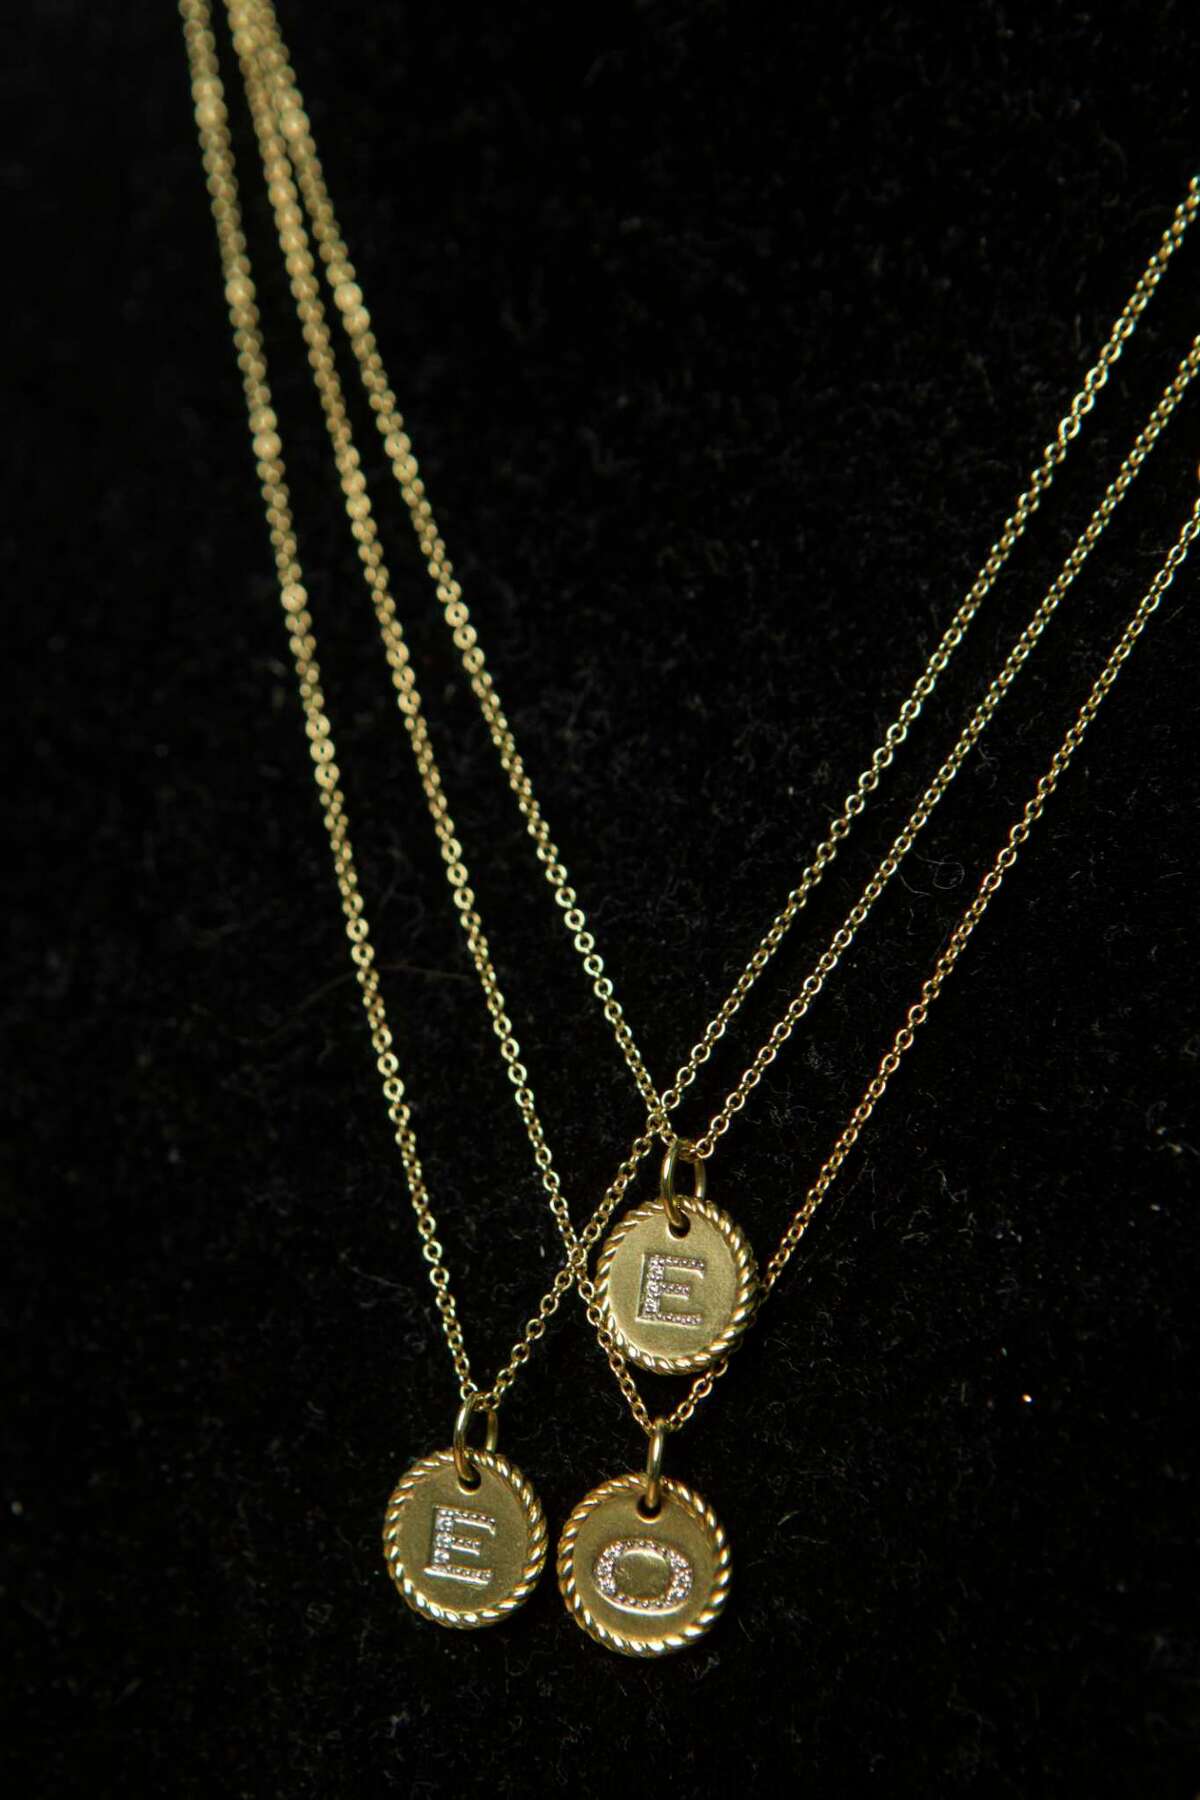 FAVORITE JEWELRY: David Yurman necklace with the initials of each of her daughters.